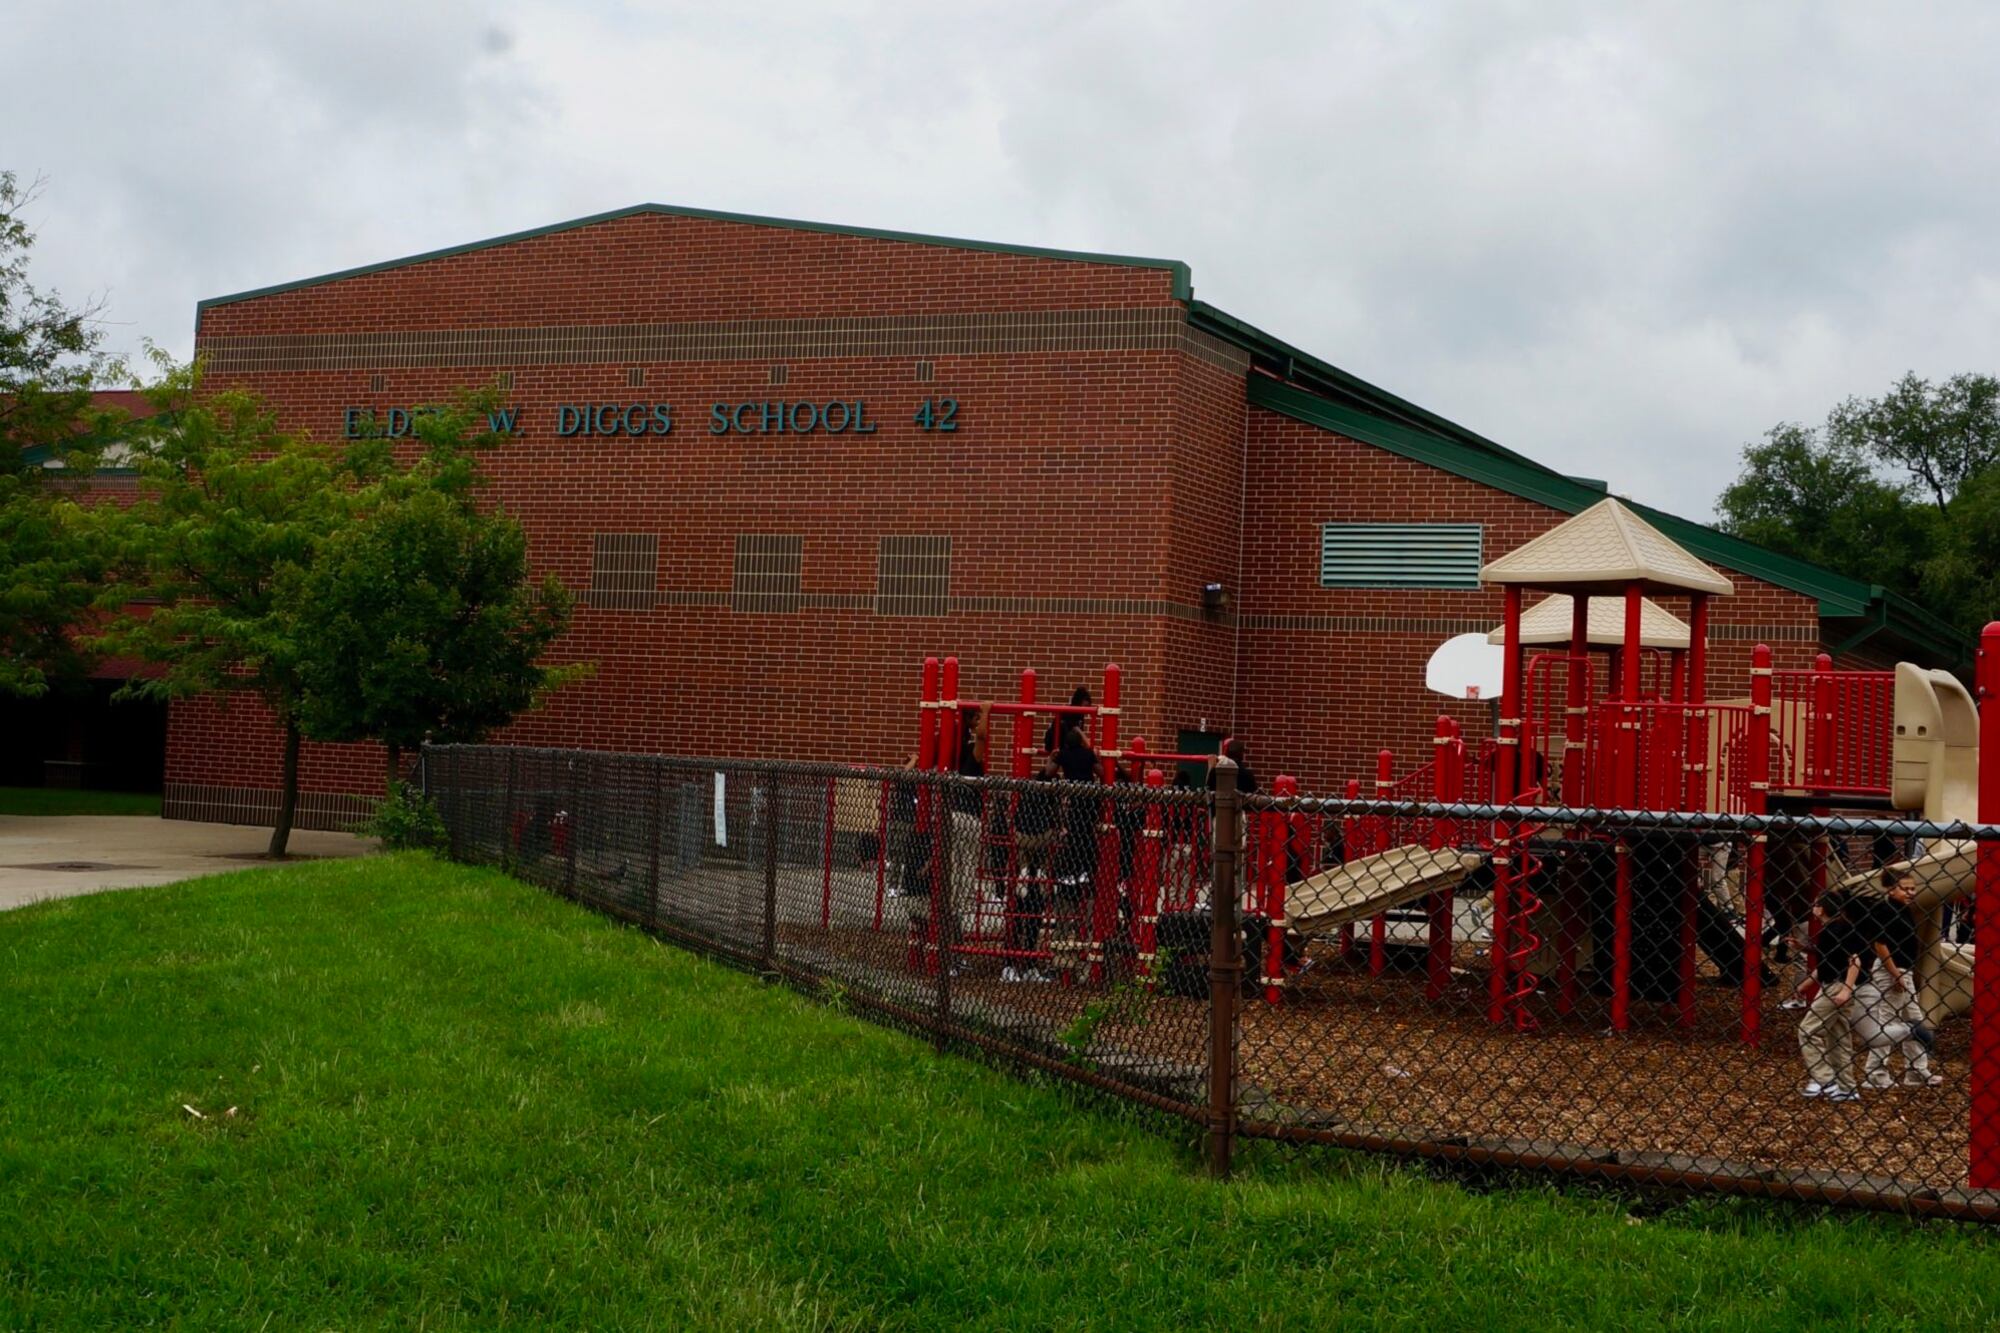 The brick exterior of Elder W. Diggs School 42 with a red playground in front.